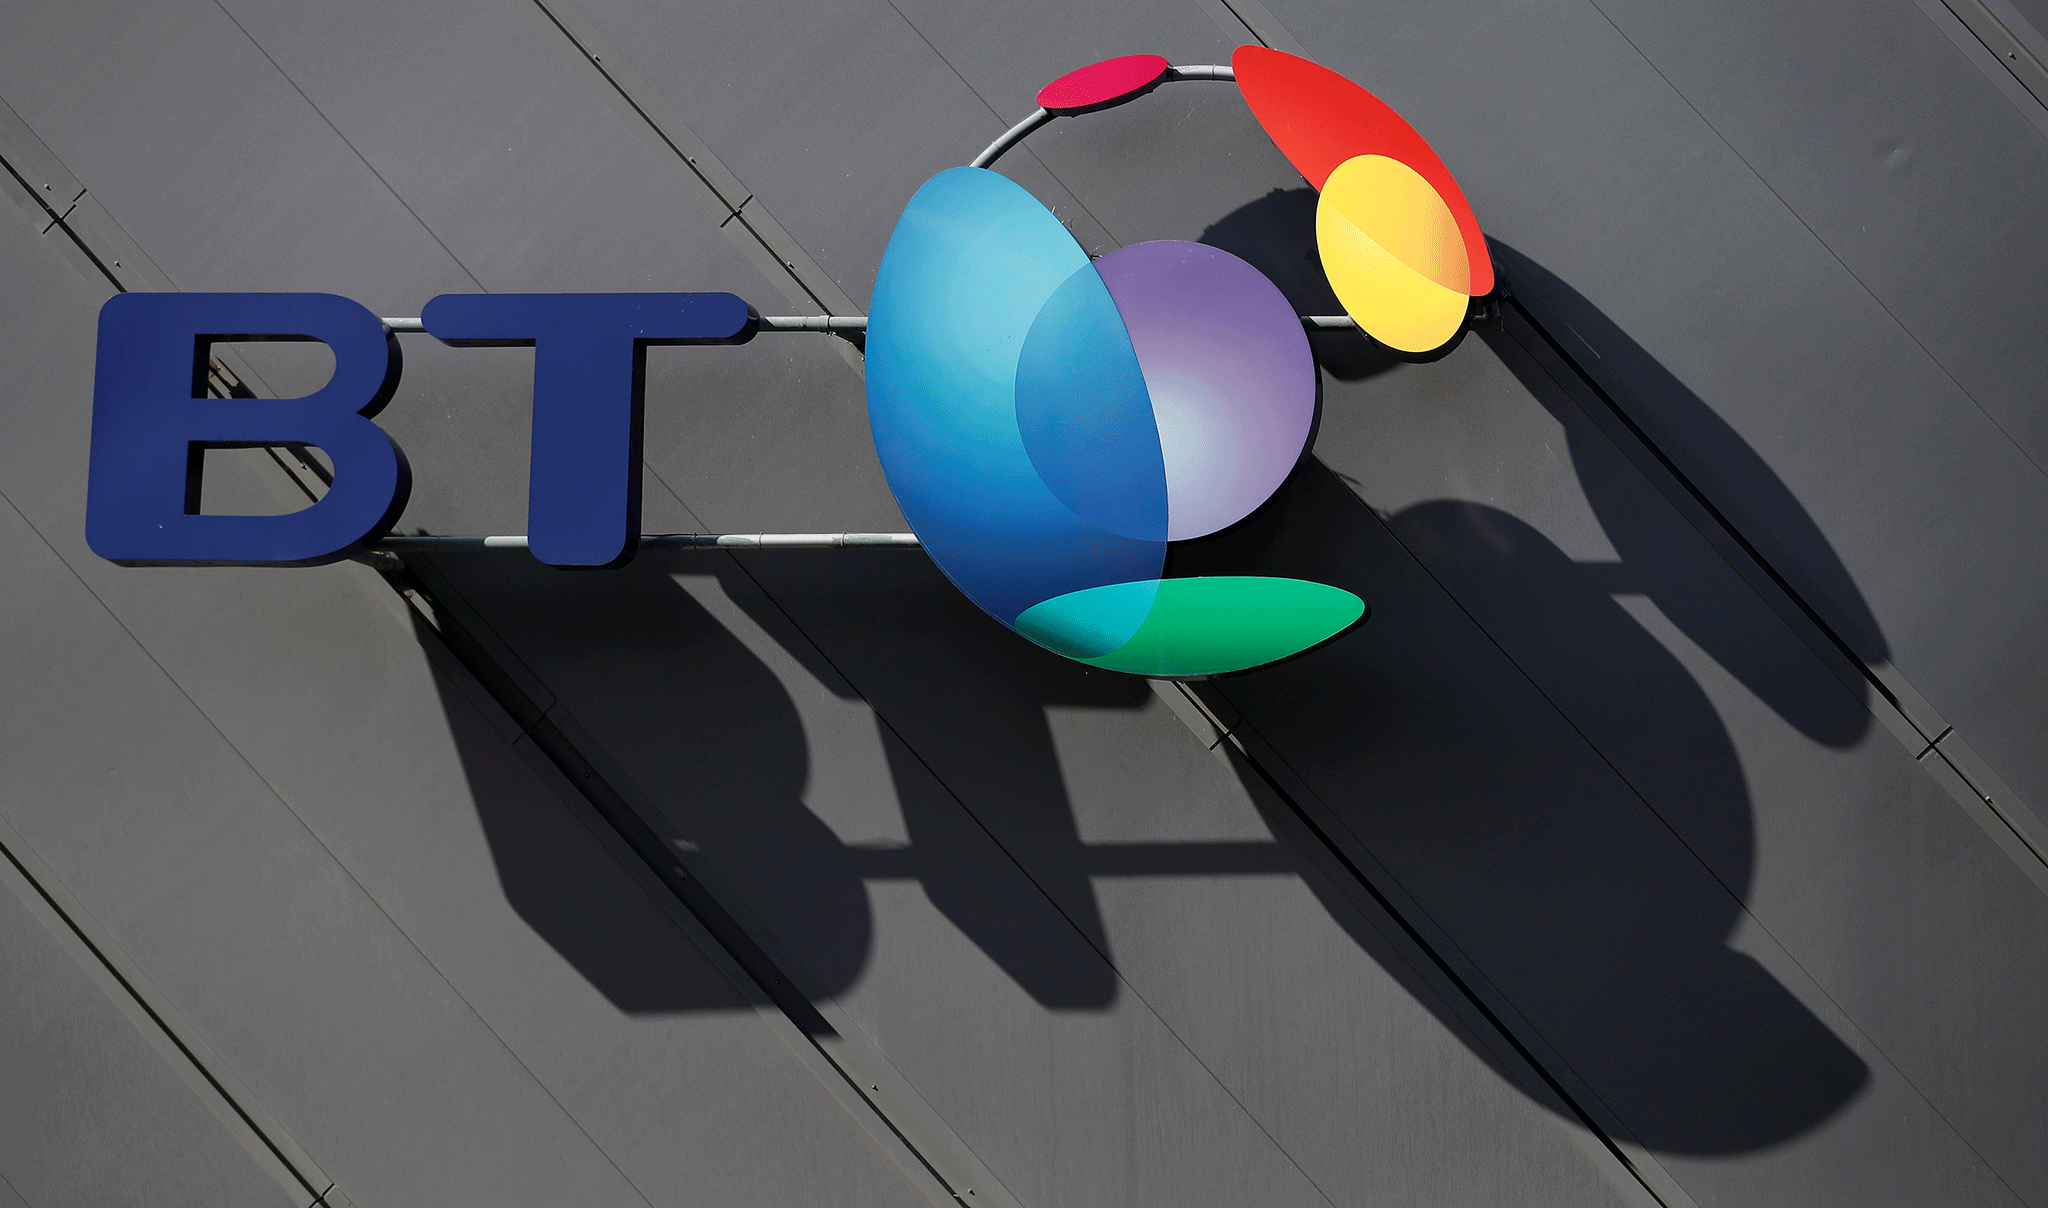 BT and Openreach must be ‘distinct’ but breakup not necessary, says Ofcom